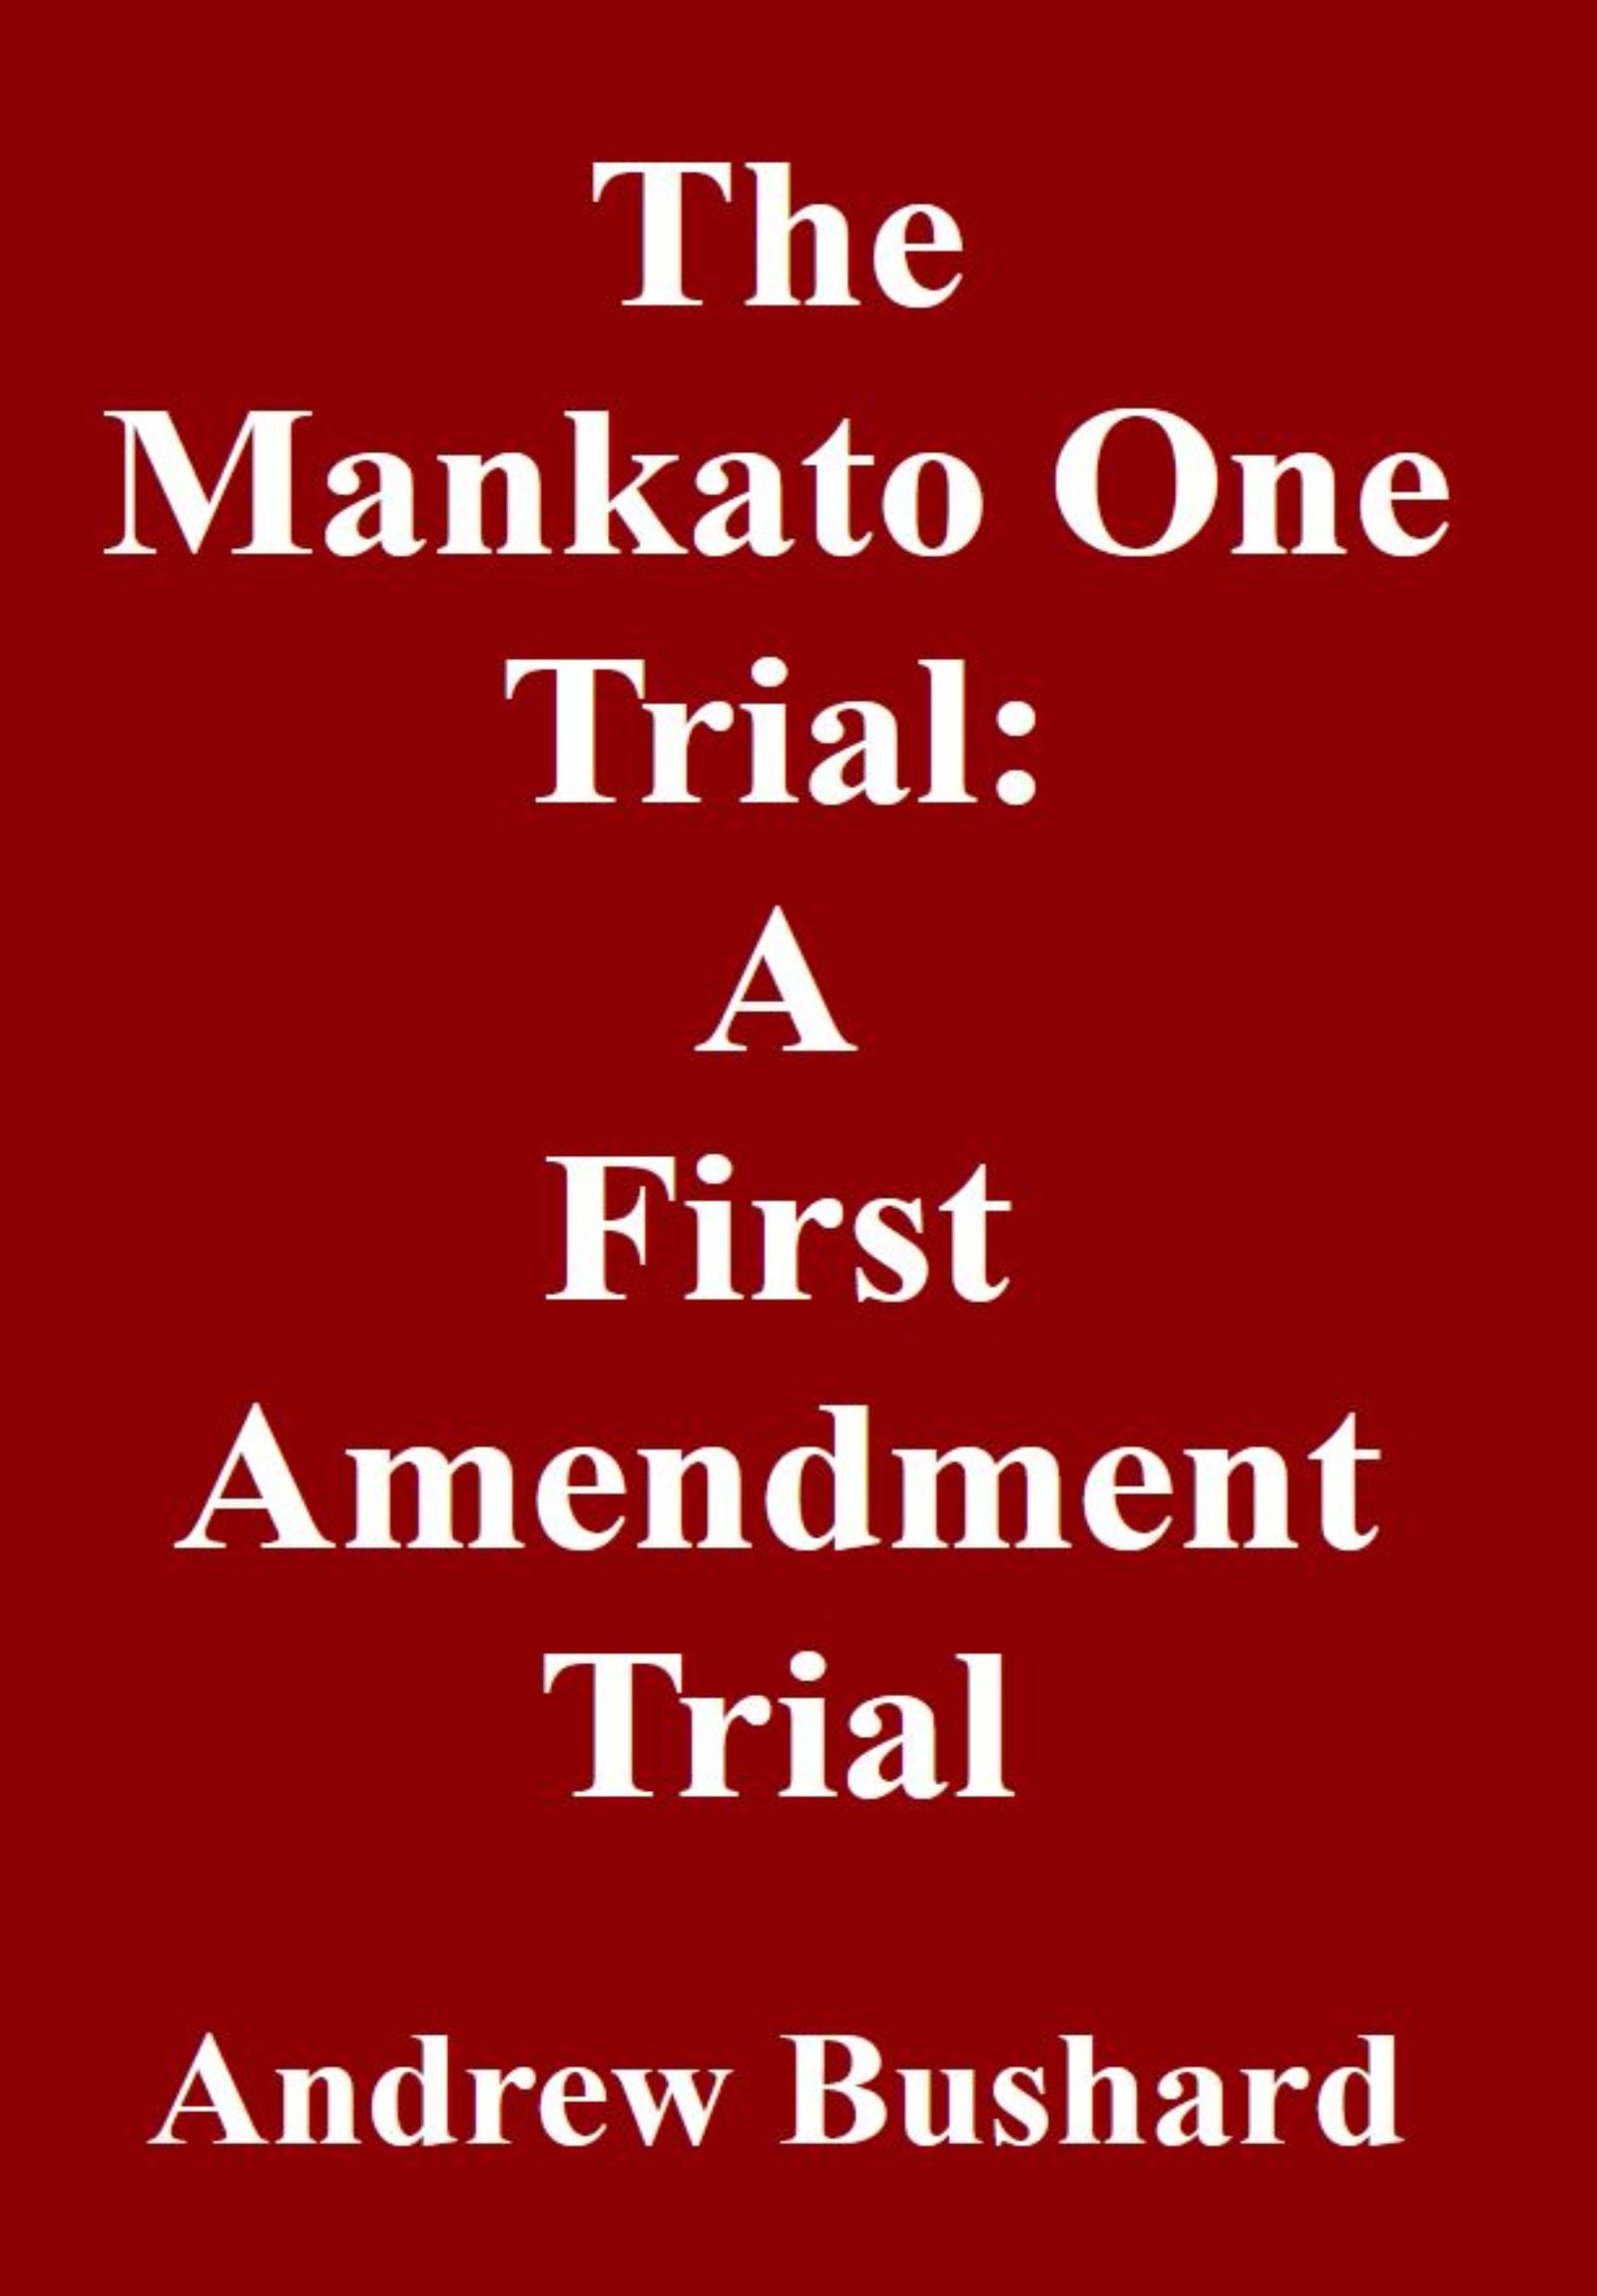 The Mankato One Trial: A First Amendment Trial's featured image